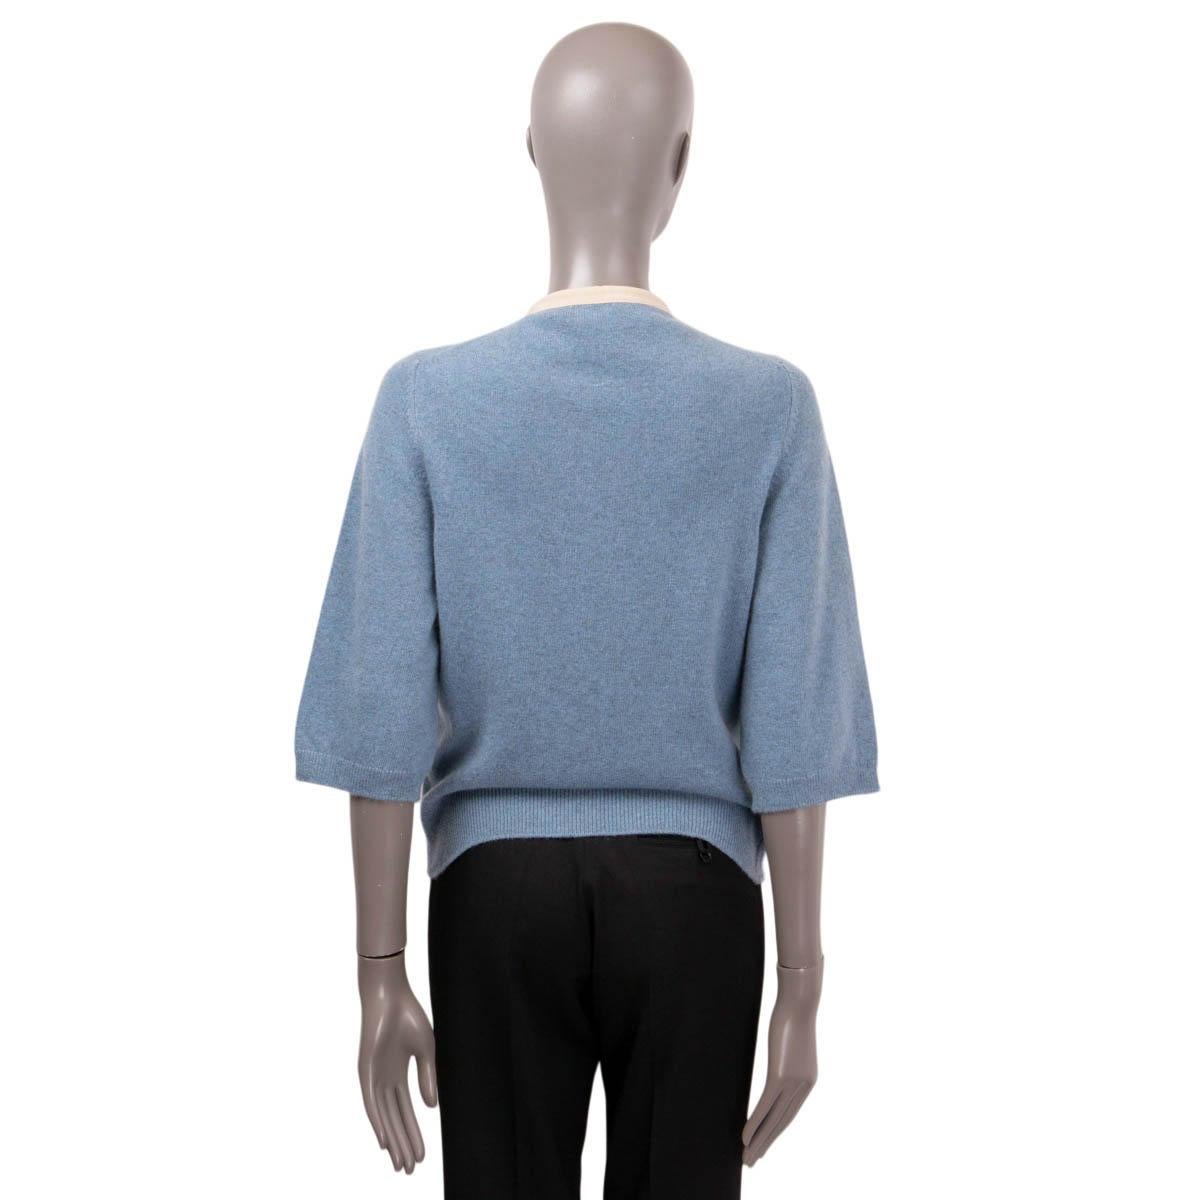 CHANEL light blue cashmere 2011 11P OPEN DRAWSTRING Cardigan Sweater 38 S For Sale 1